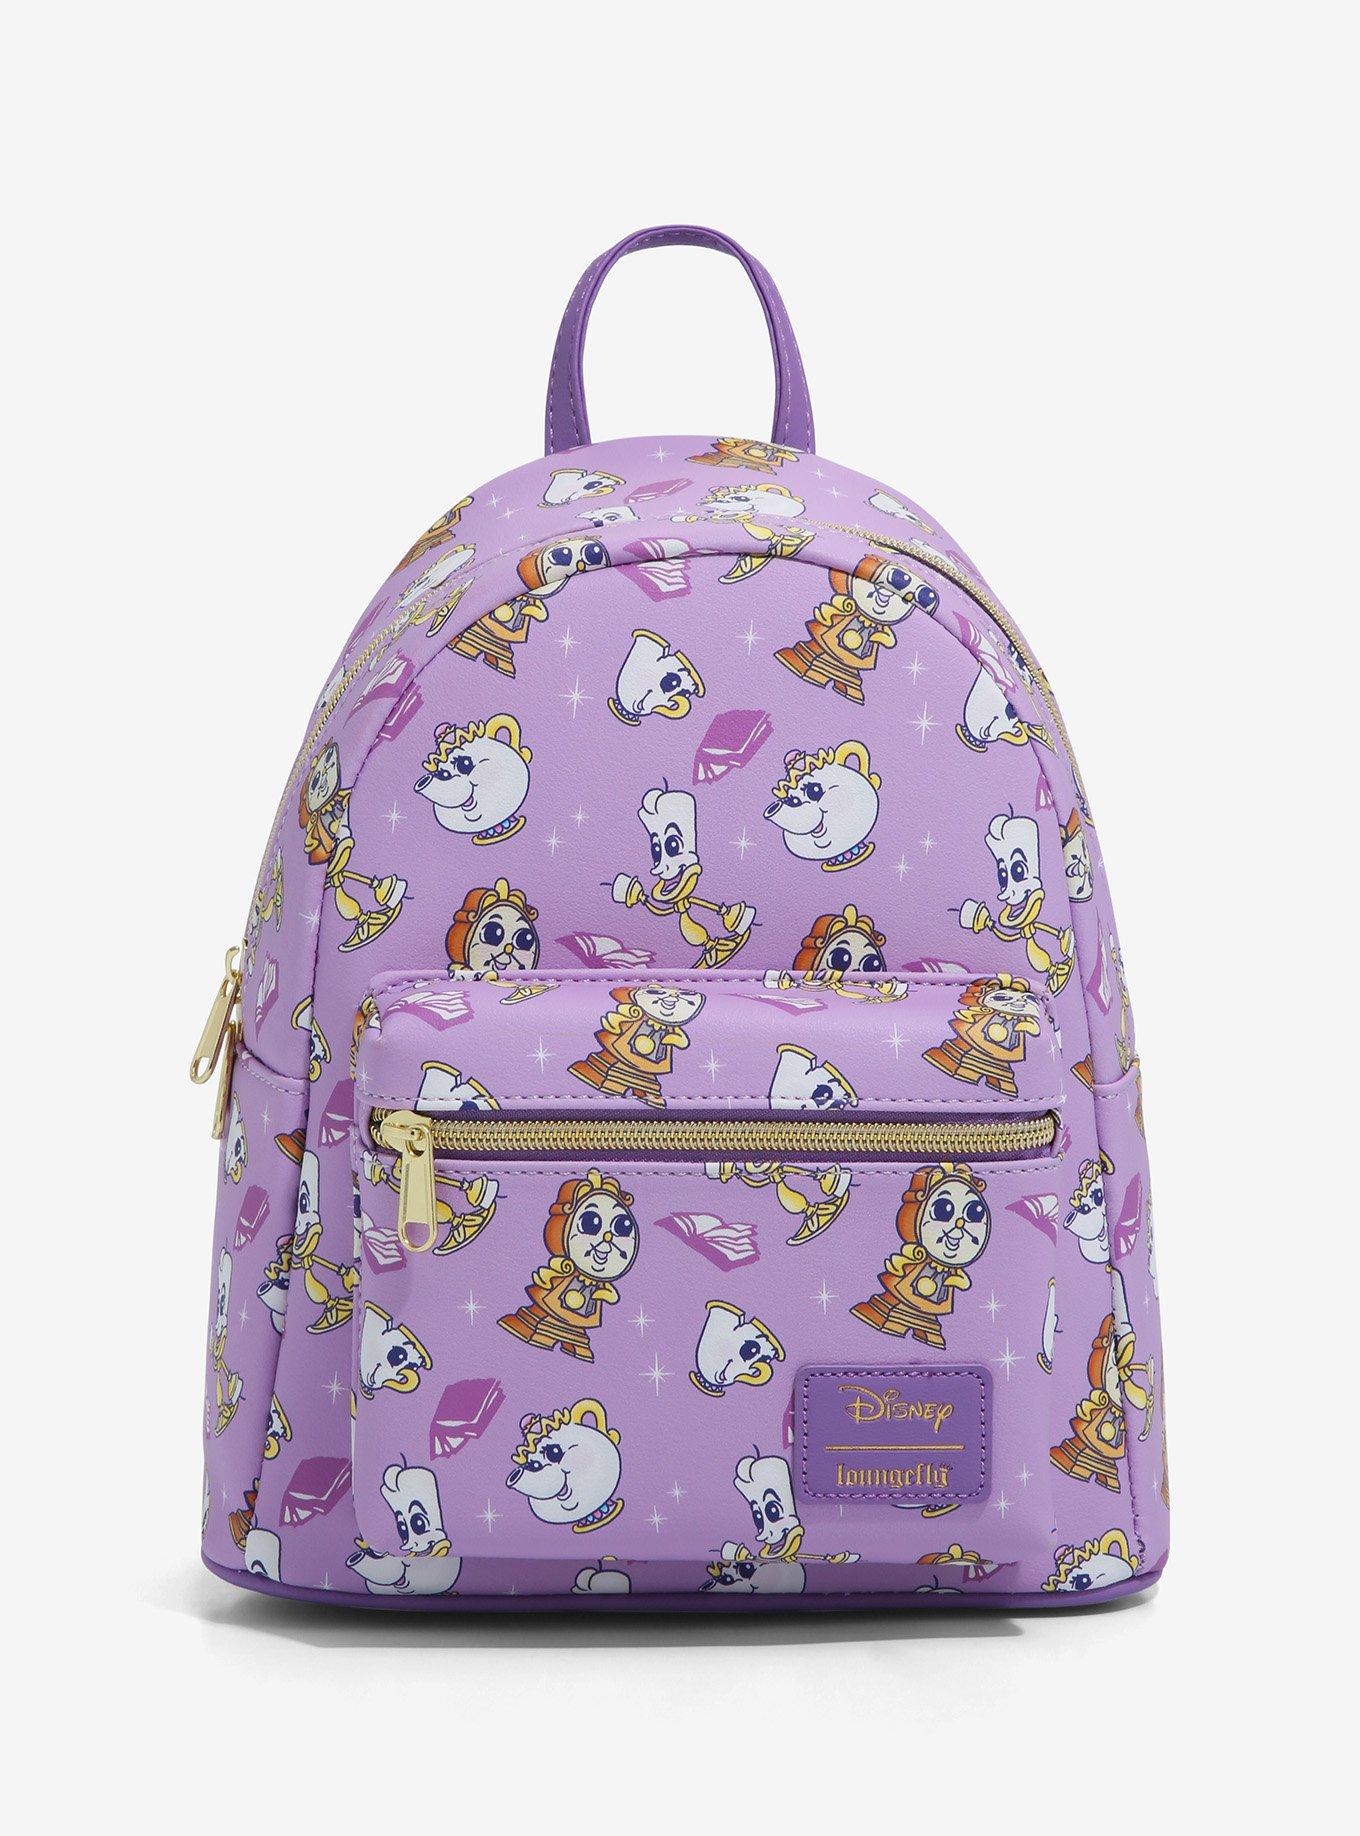 Sleeping Beauty: Floral Fairy Godmother Loungefly Mini Backpack